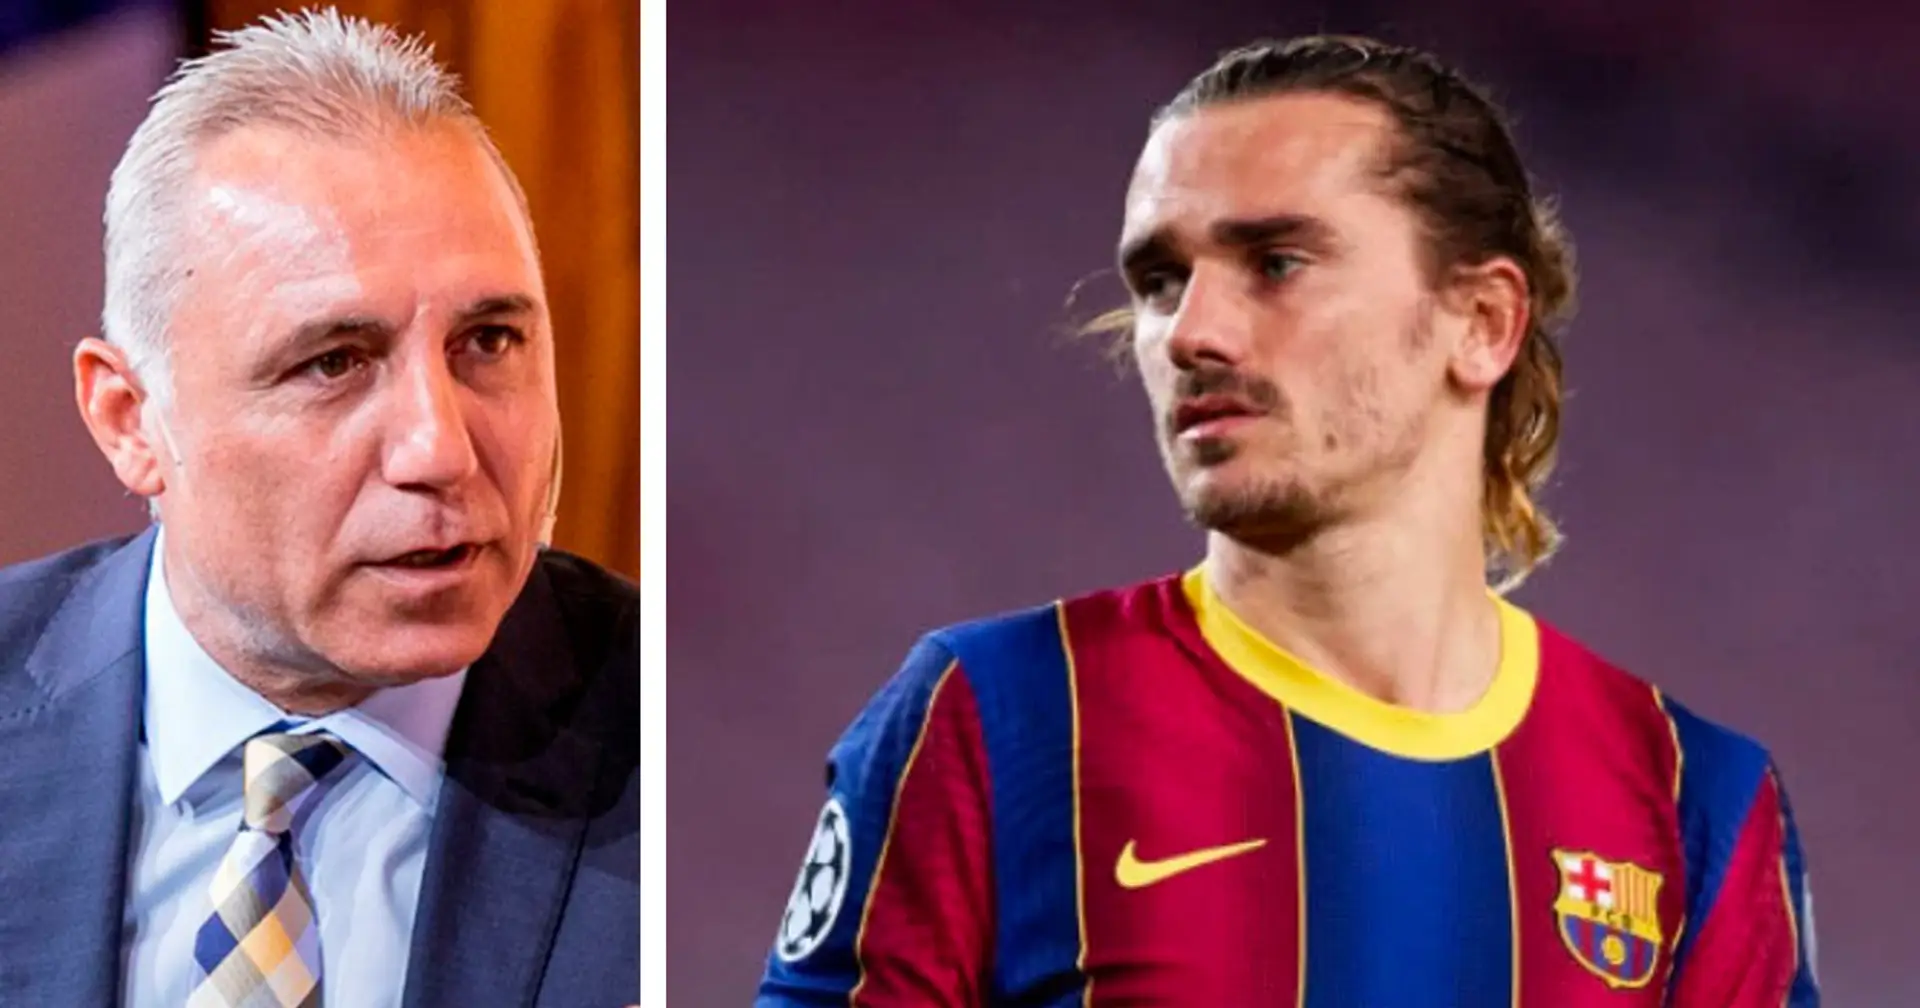 'Whenever Griezmann is on the pitch, Barca play with 10 men': Blaugrana legend Stoichkov